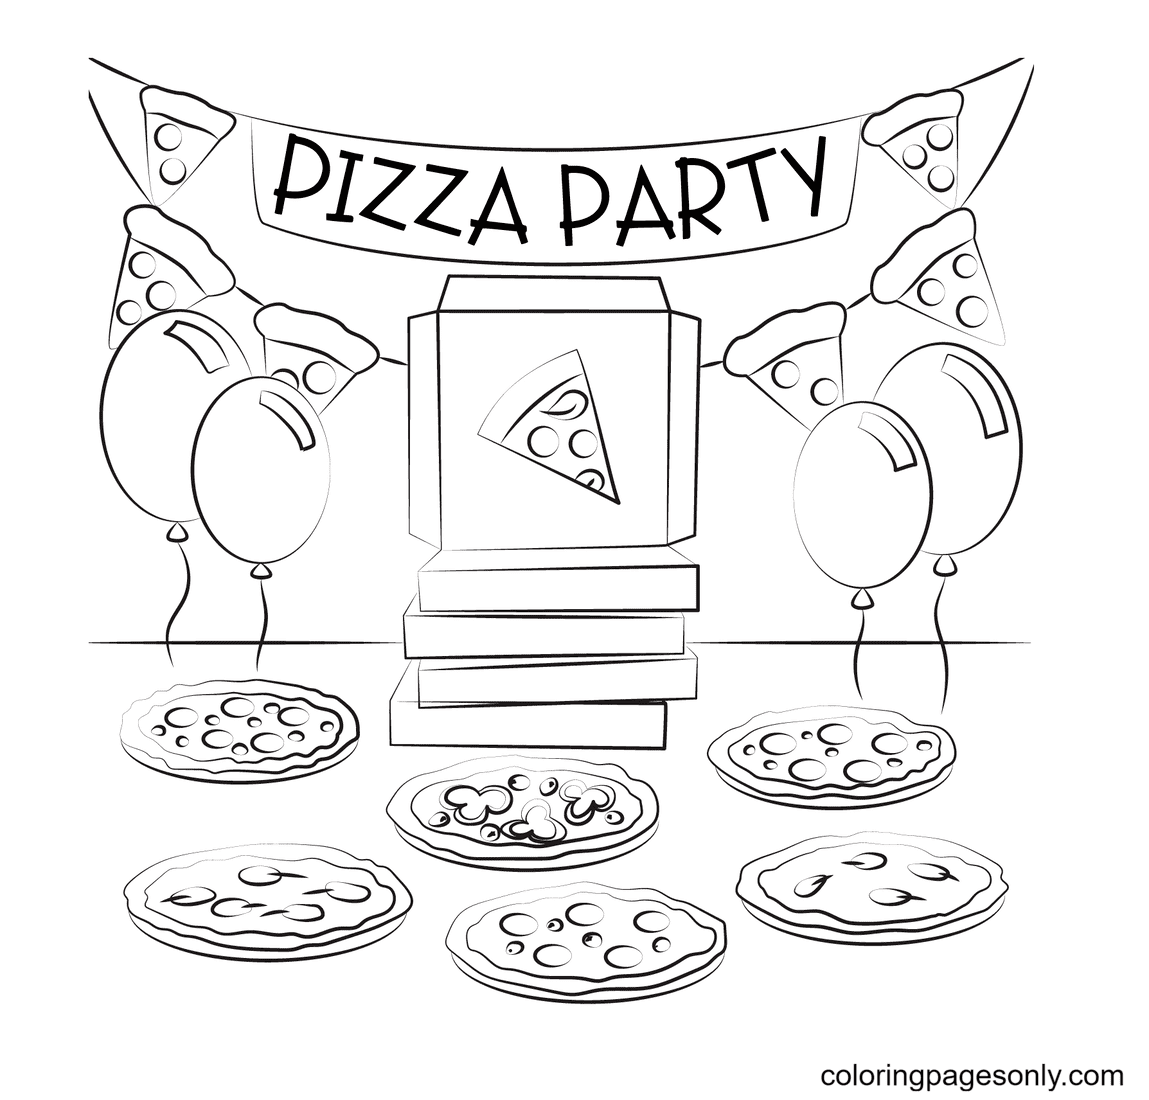 Pizza Party Coloring Page